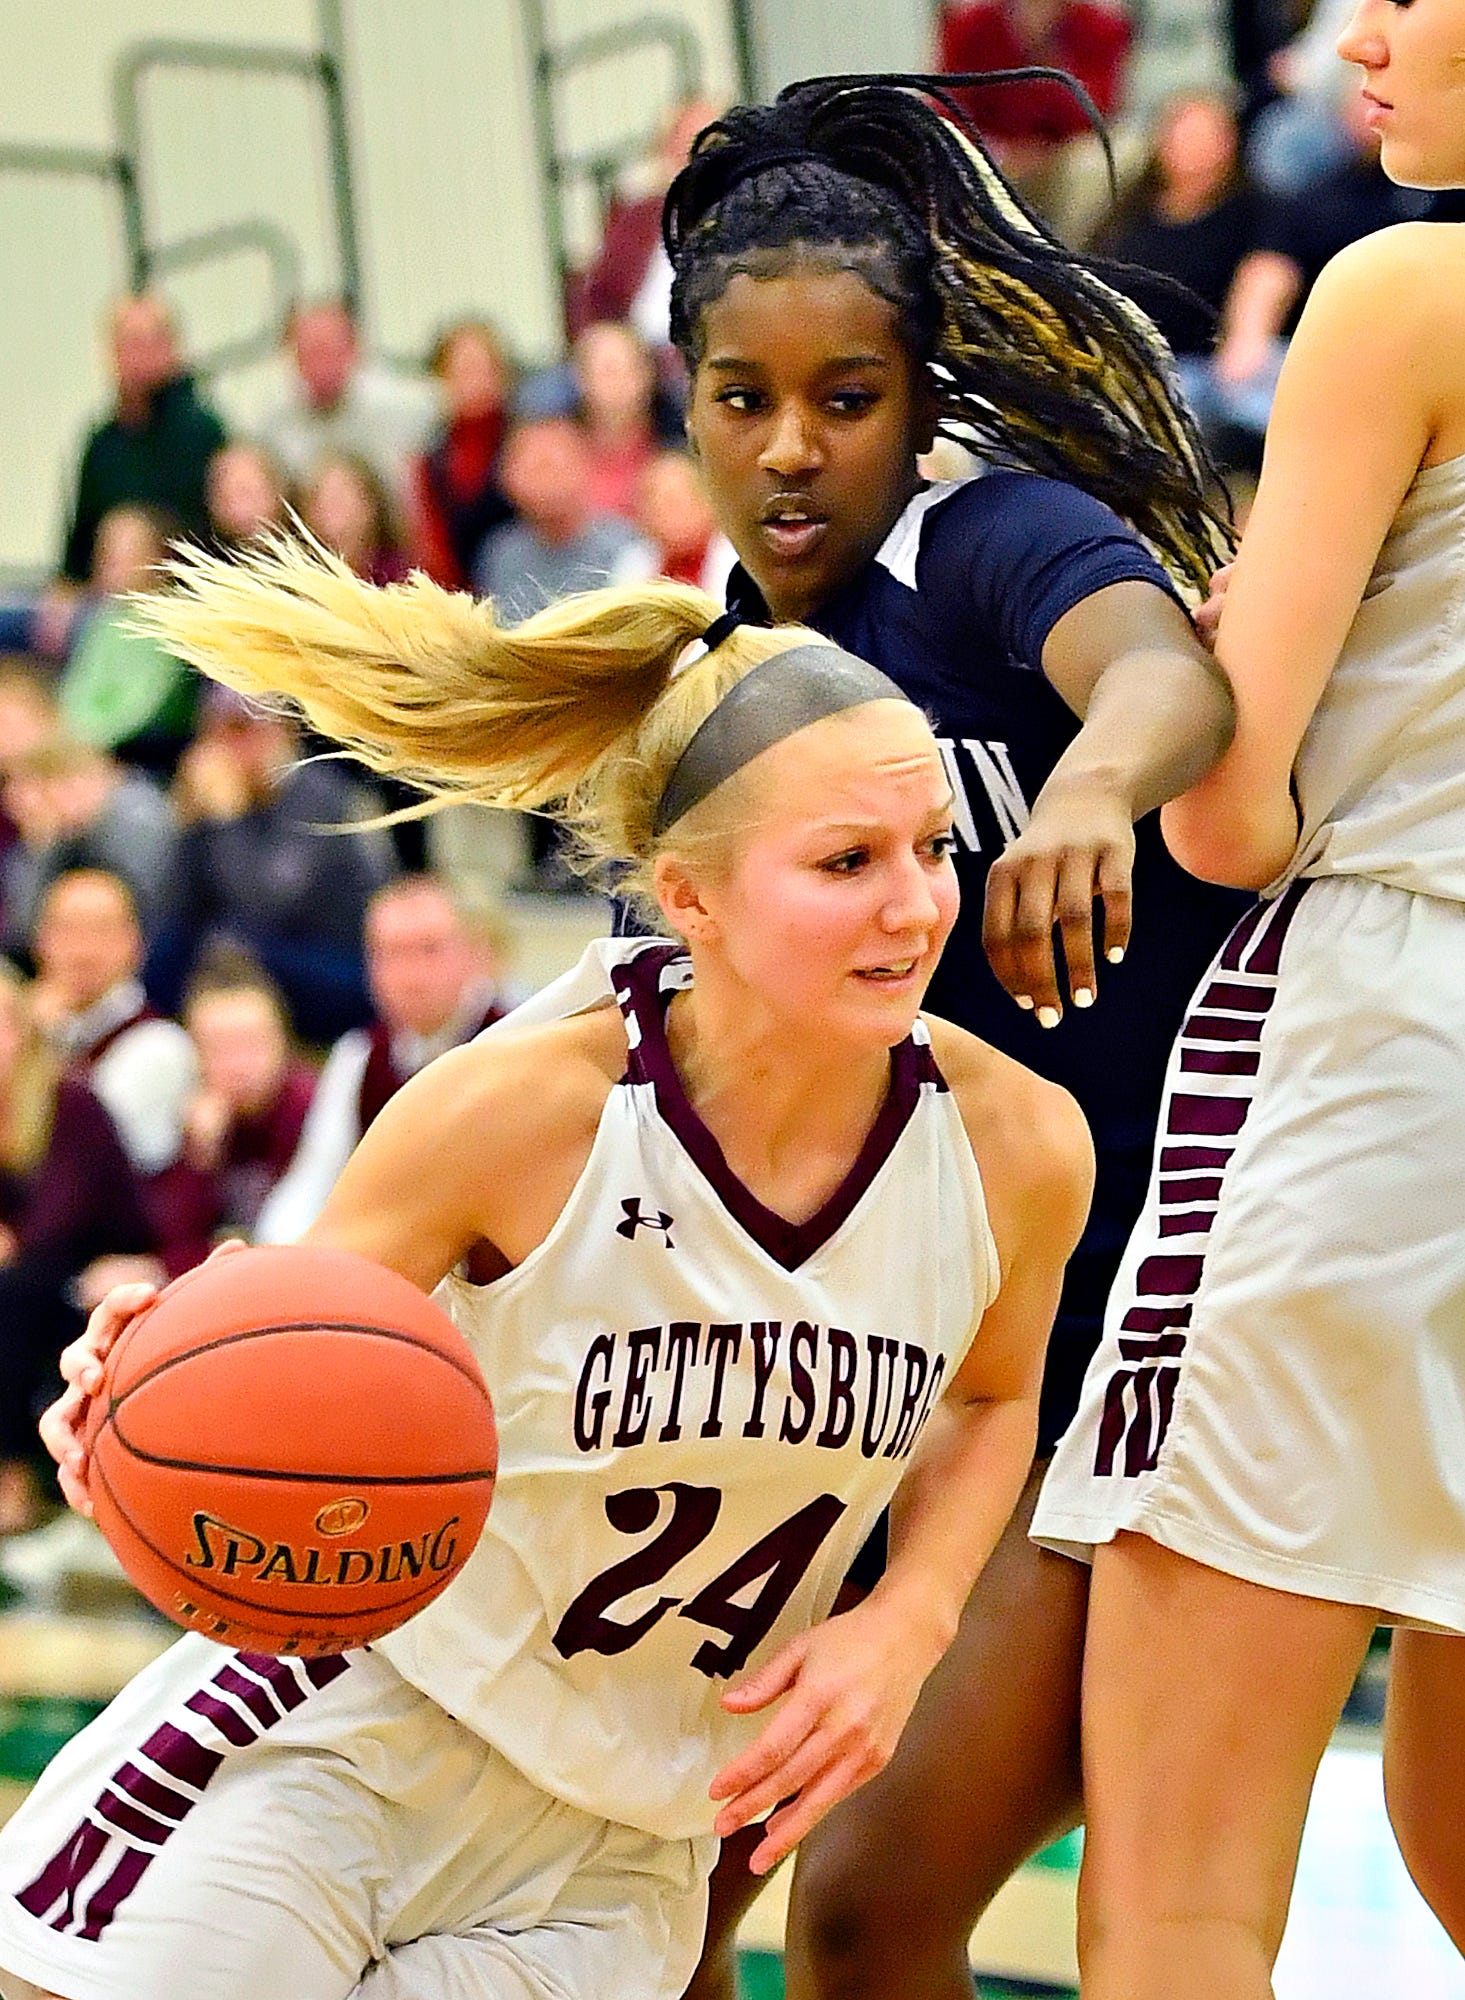 Gettysburg's Anne Bair, left, drives the ball past Dallastown's D'Shantae Edwards during YAIAA girls' basketball championship action at Grumbacher Sport and Fitness Center at York College of Pennsylvania in Spring Garden Township, Friday, Feb. 14, 2020. Dawn J. Sagert photo